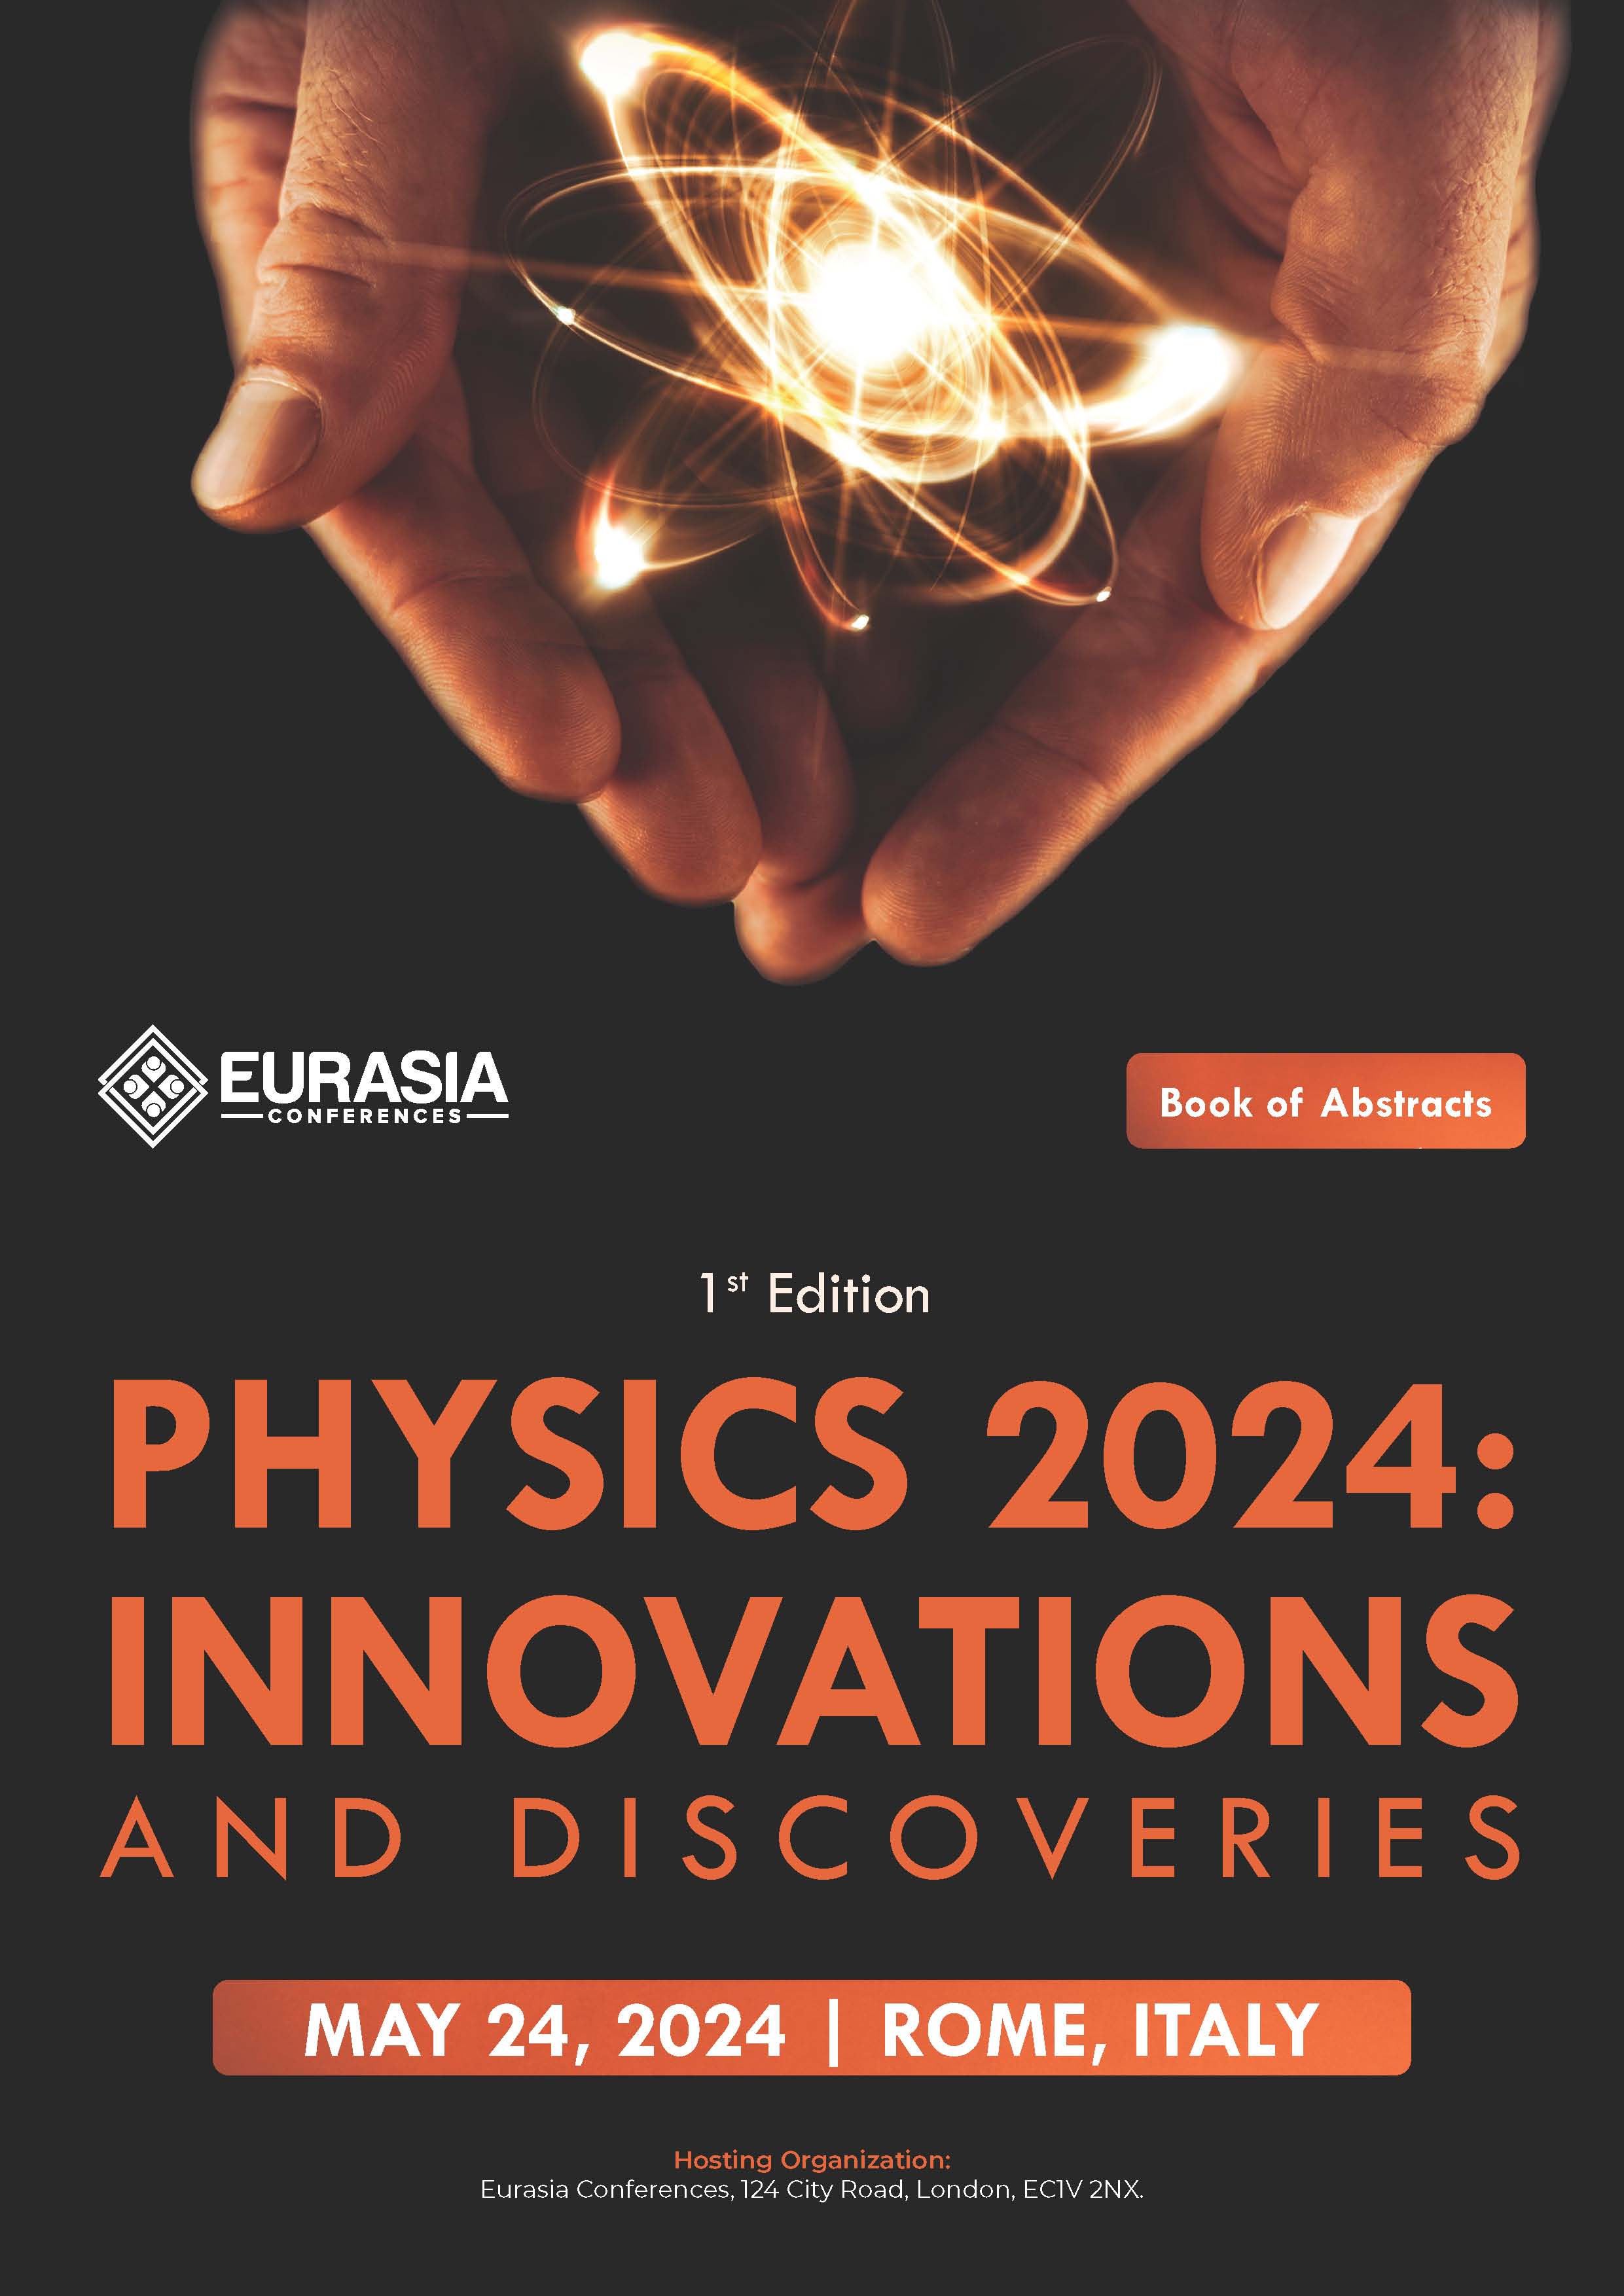 Abstracts of the 1st Edition Physics 2024: Innovations and Discoveries